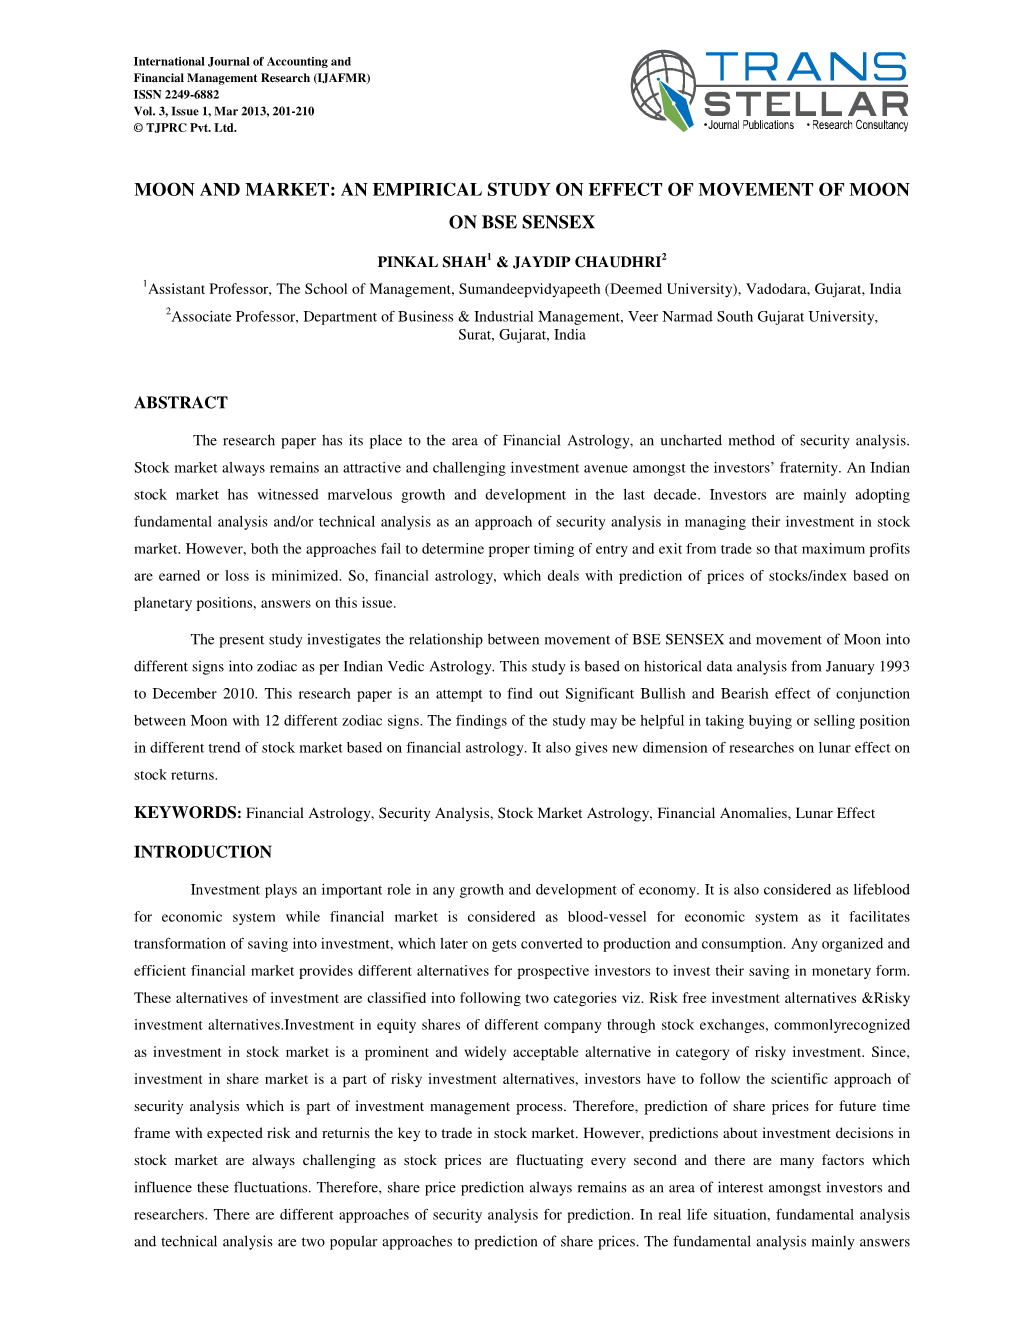 Moon and Market: an Empirical Study on Effect of Movement of Moon on Bse Sensex